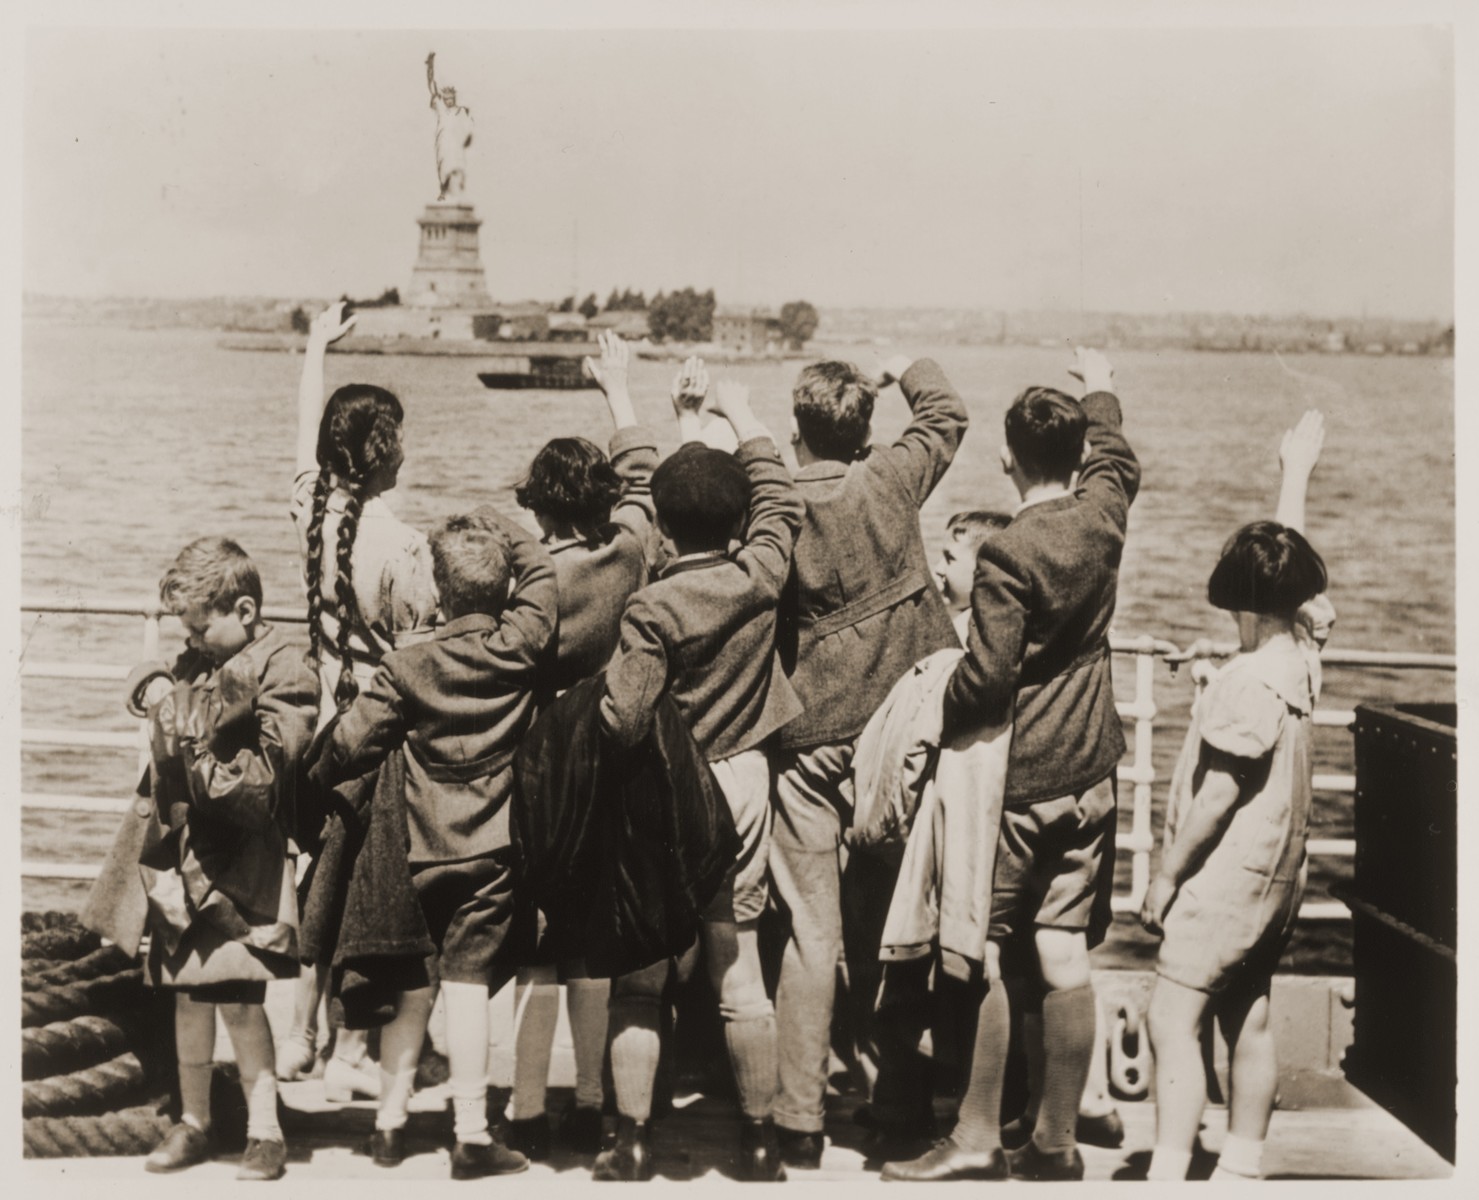 Jewish refugee children wave at the Statue of Liberty as the President Harding steams into New York harbor.

These children are among a group of fifty Jewish refugees (25 boys and 25 girls) from Vienna, aged 5 to 14, who are en route to Philadelphia, where they will be placed with foster families.  The children were accompanied by Gilbert J. Kraus, a Philadelphia attorney, and his wife Eleanor, who had worked for months to secure their admission into the U.S.

Among those pictured is Johanna Braun Gitlin (two, long braids).